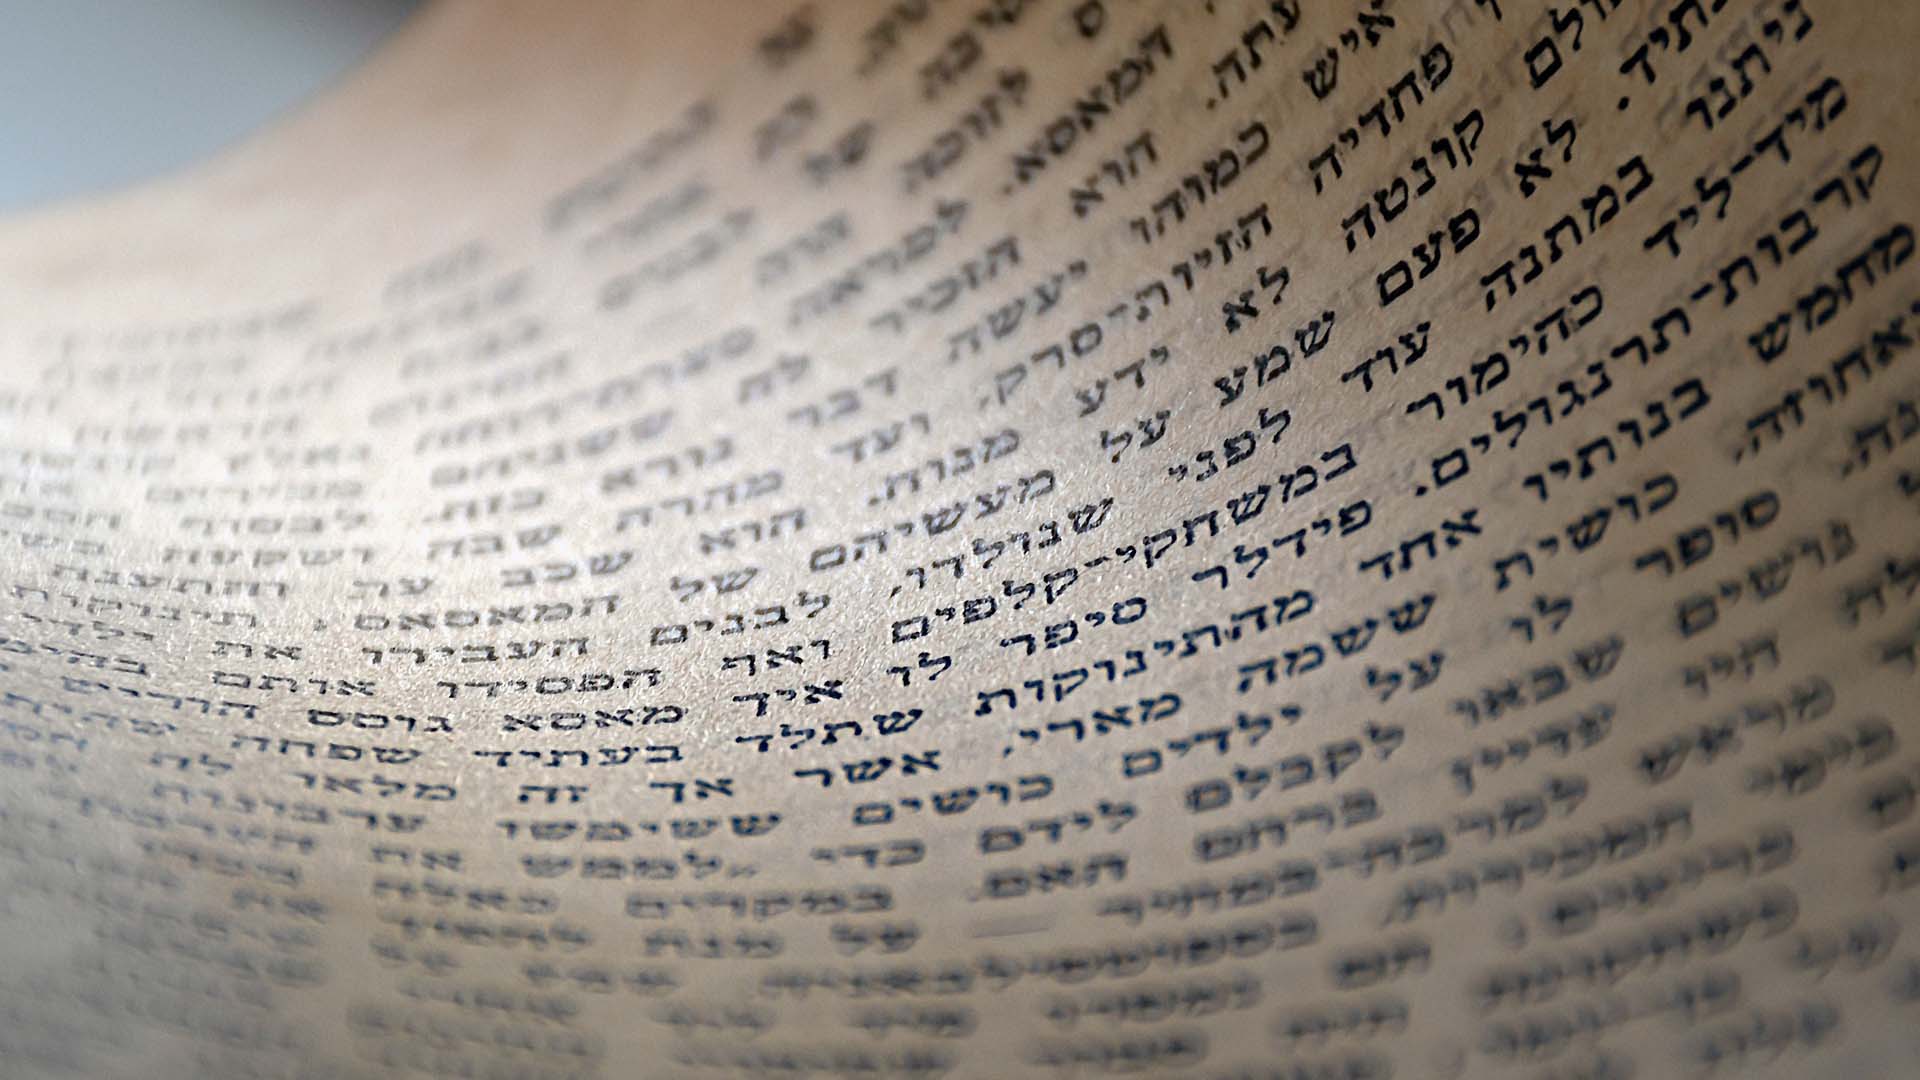 Photo of Hebrew text by Ri Butov from Pixabay